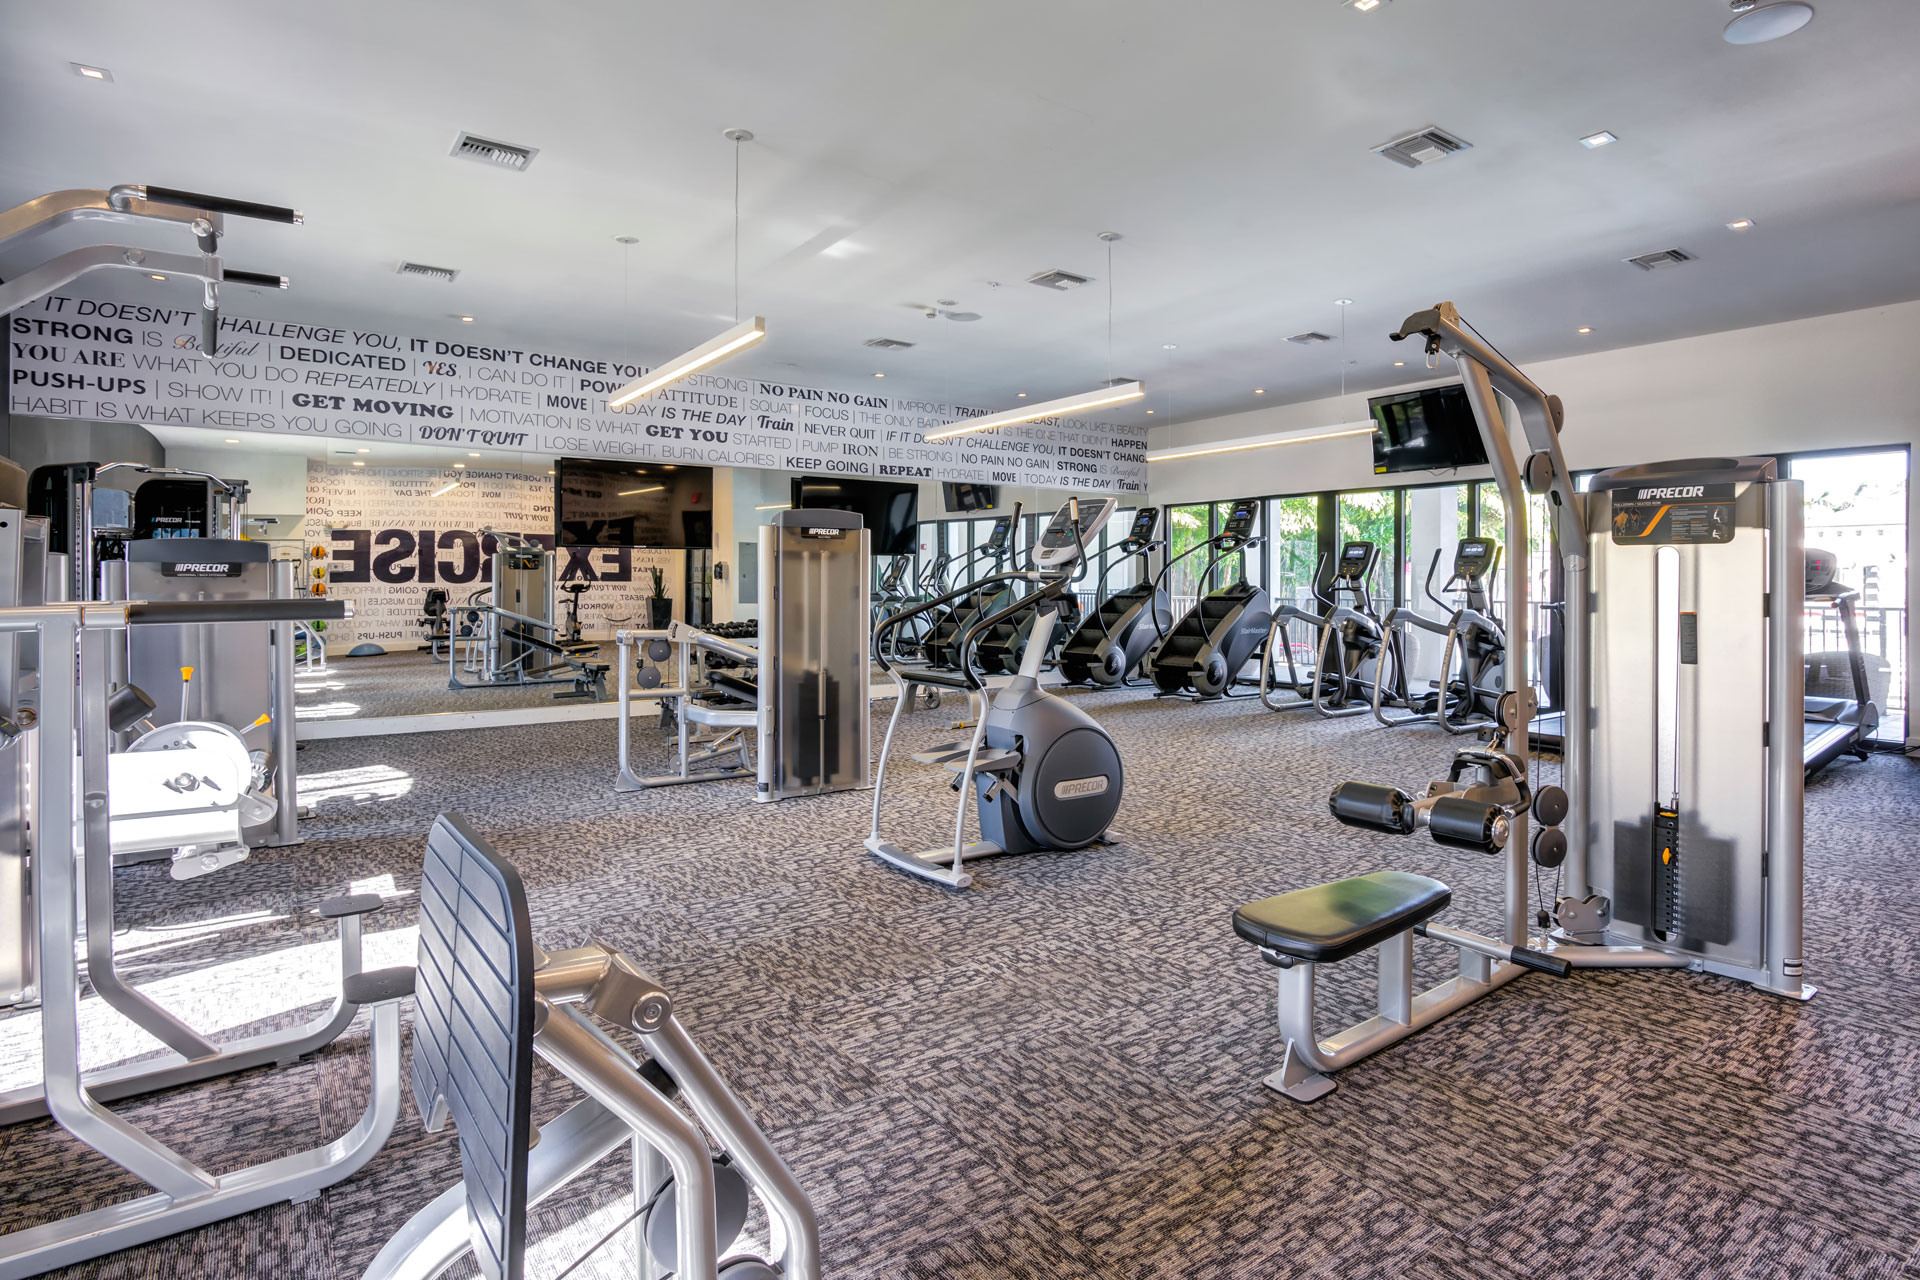 Fitness center with weight and cardio machines.